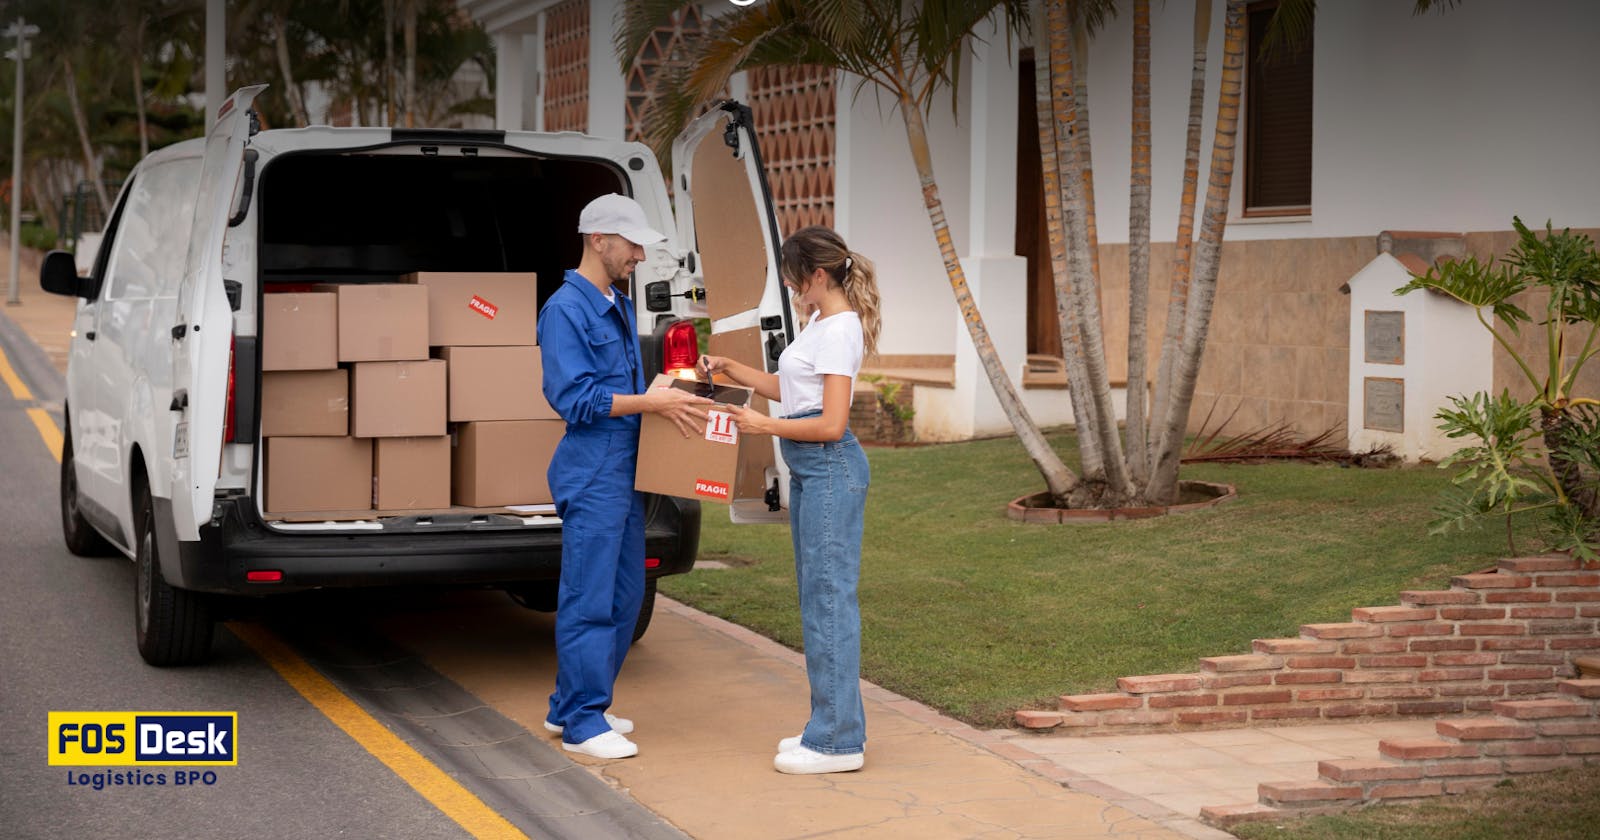 The Role of Pickup and Delivery in Logistics